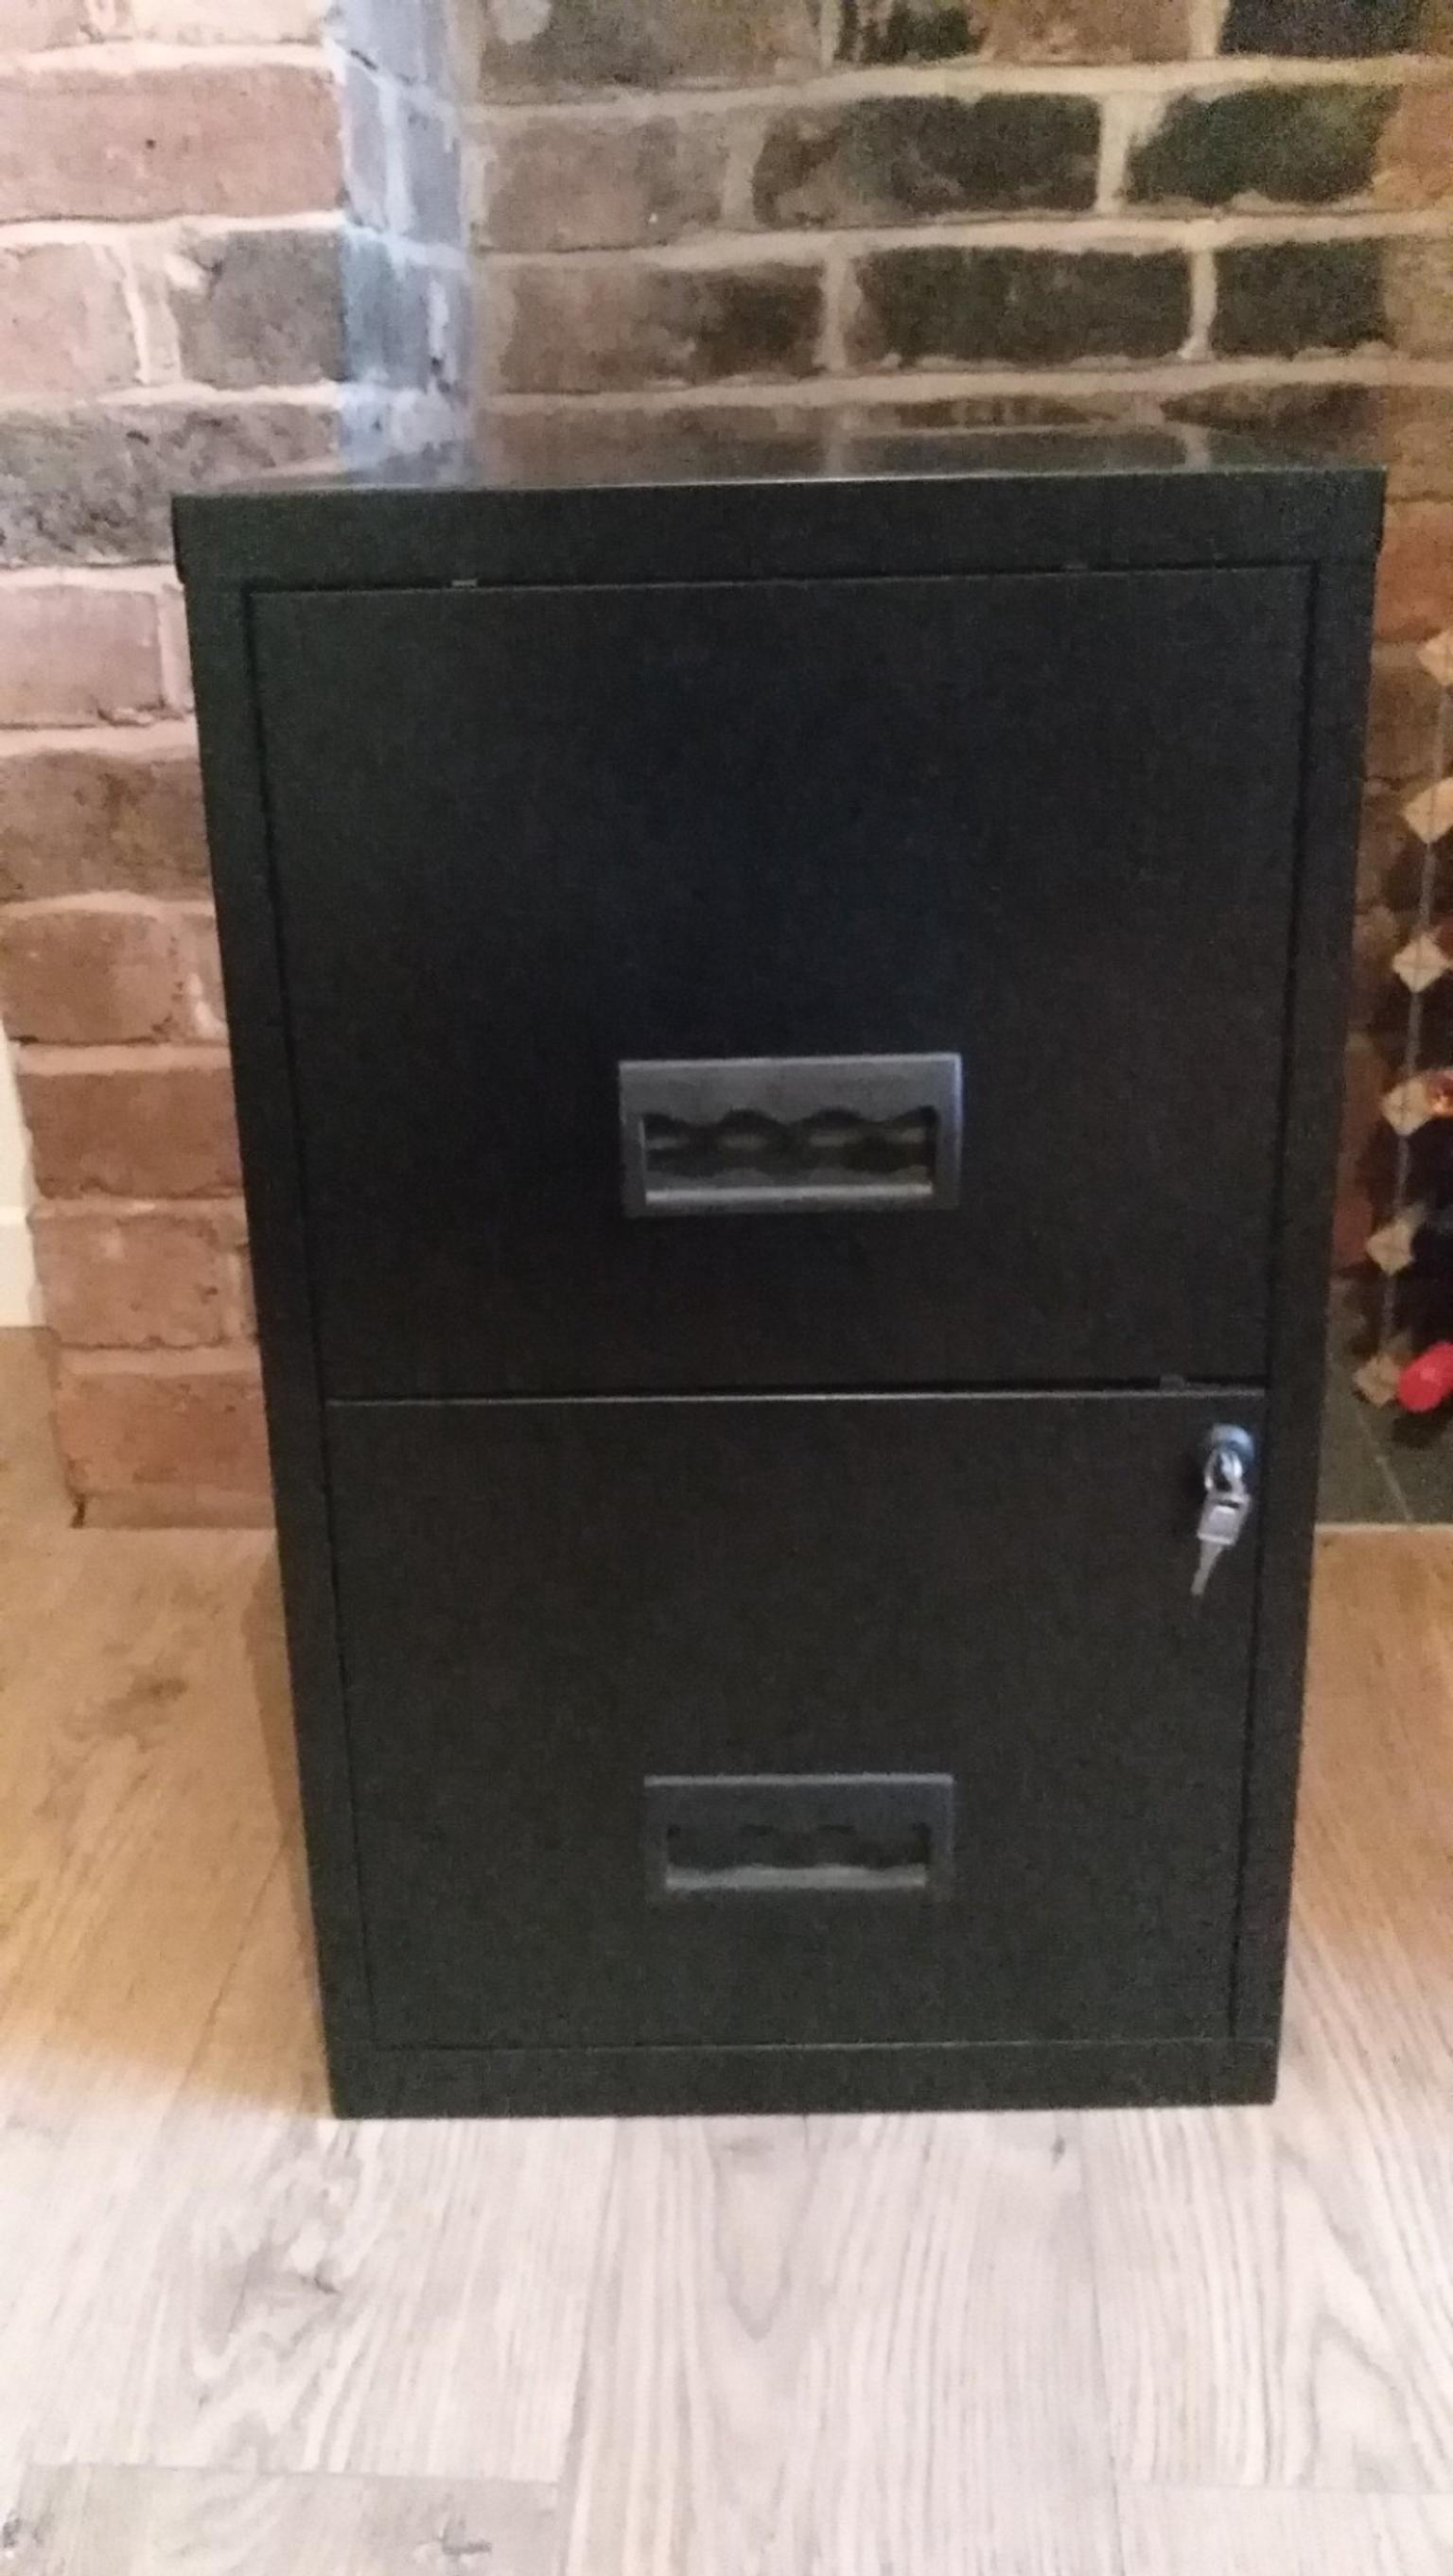 Staples Two Drawer Lockable Filing Cabinet In Dy8 Dudley Fur 10 00